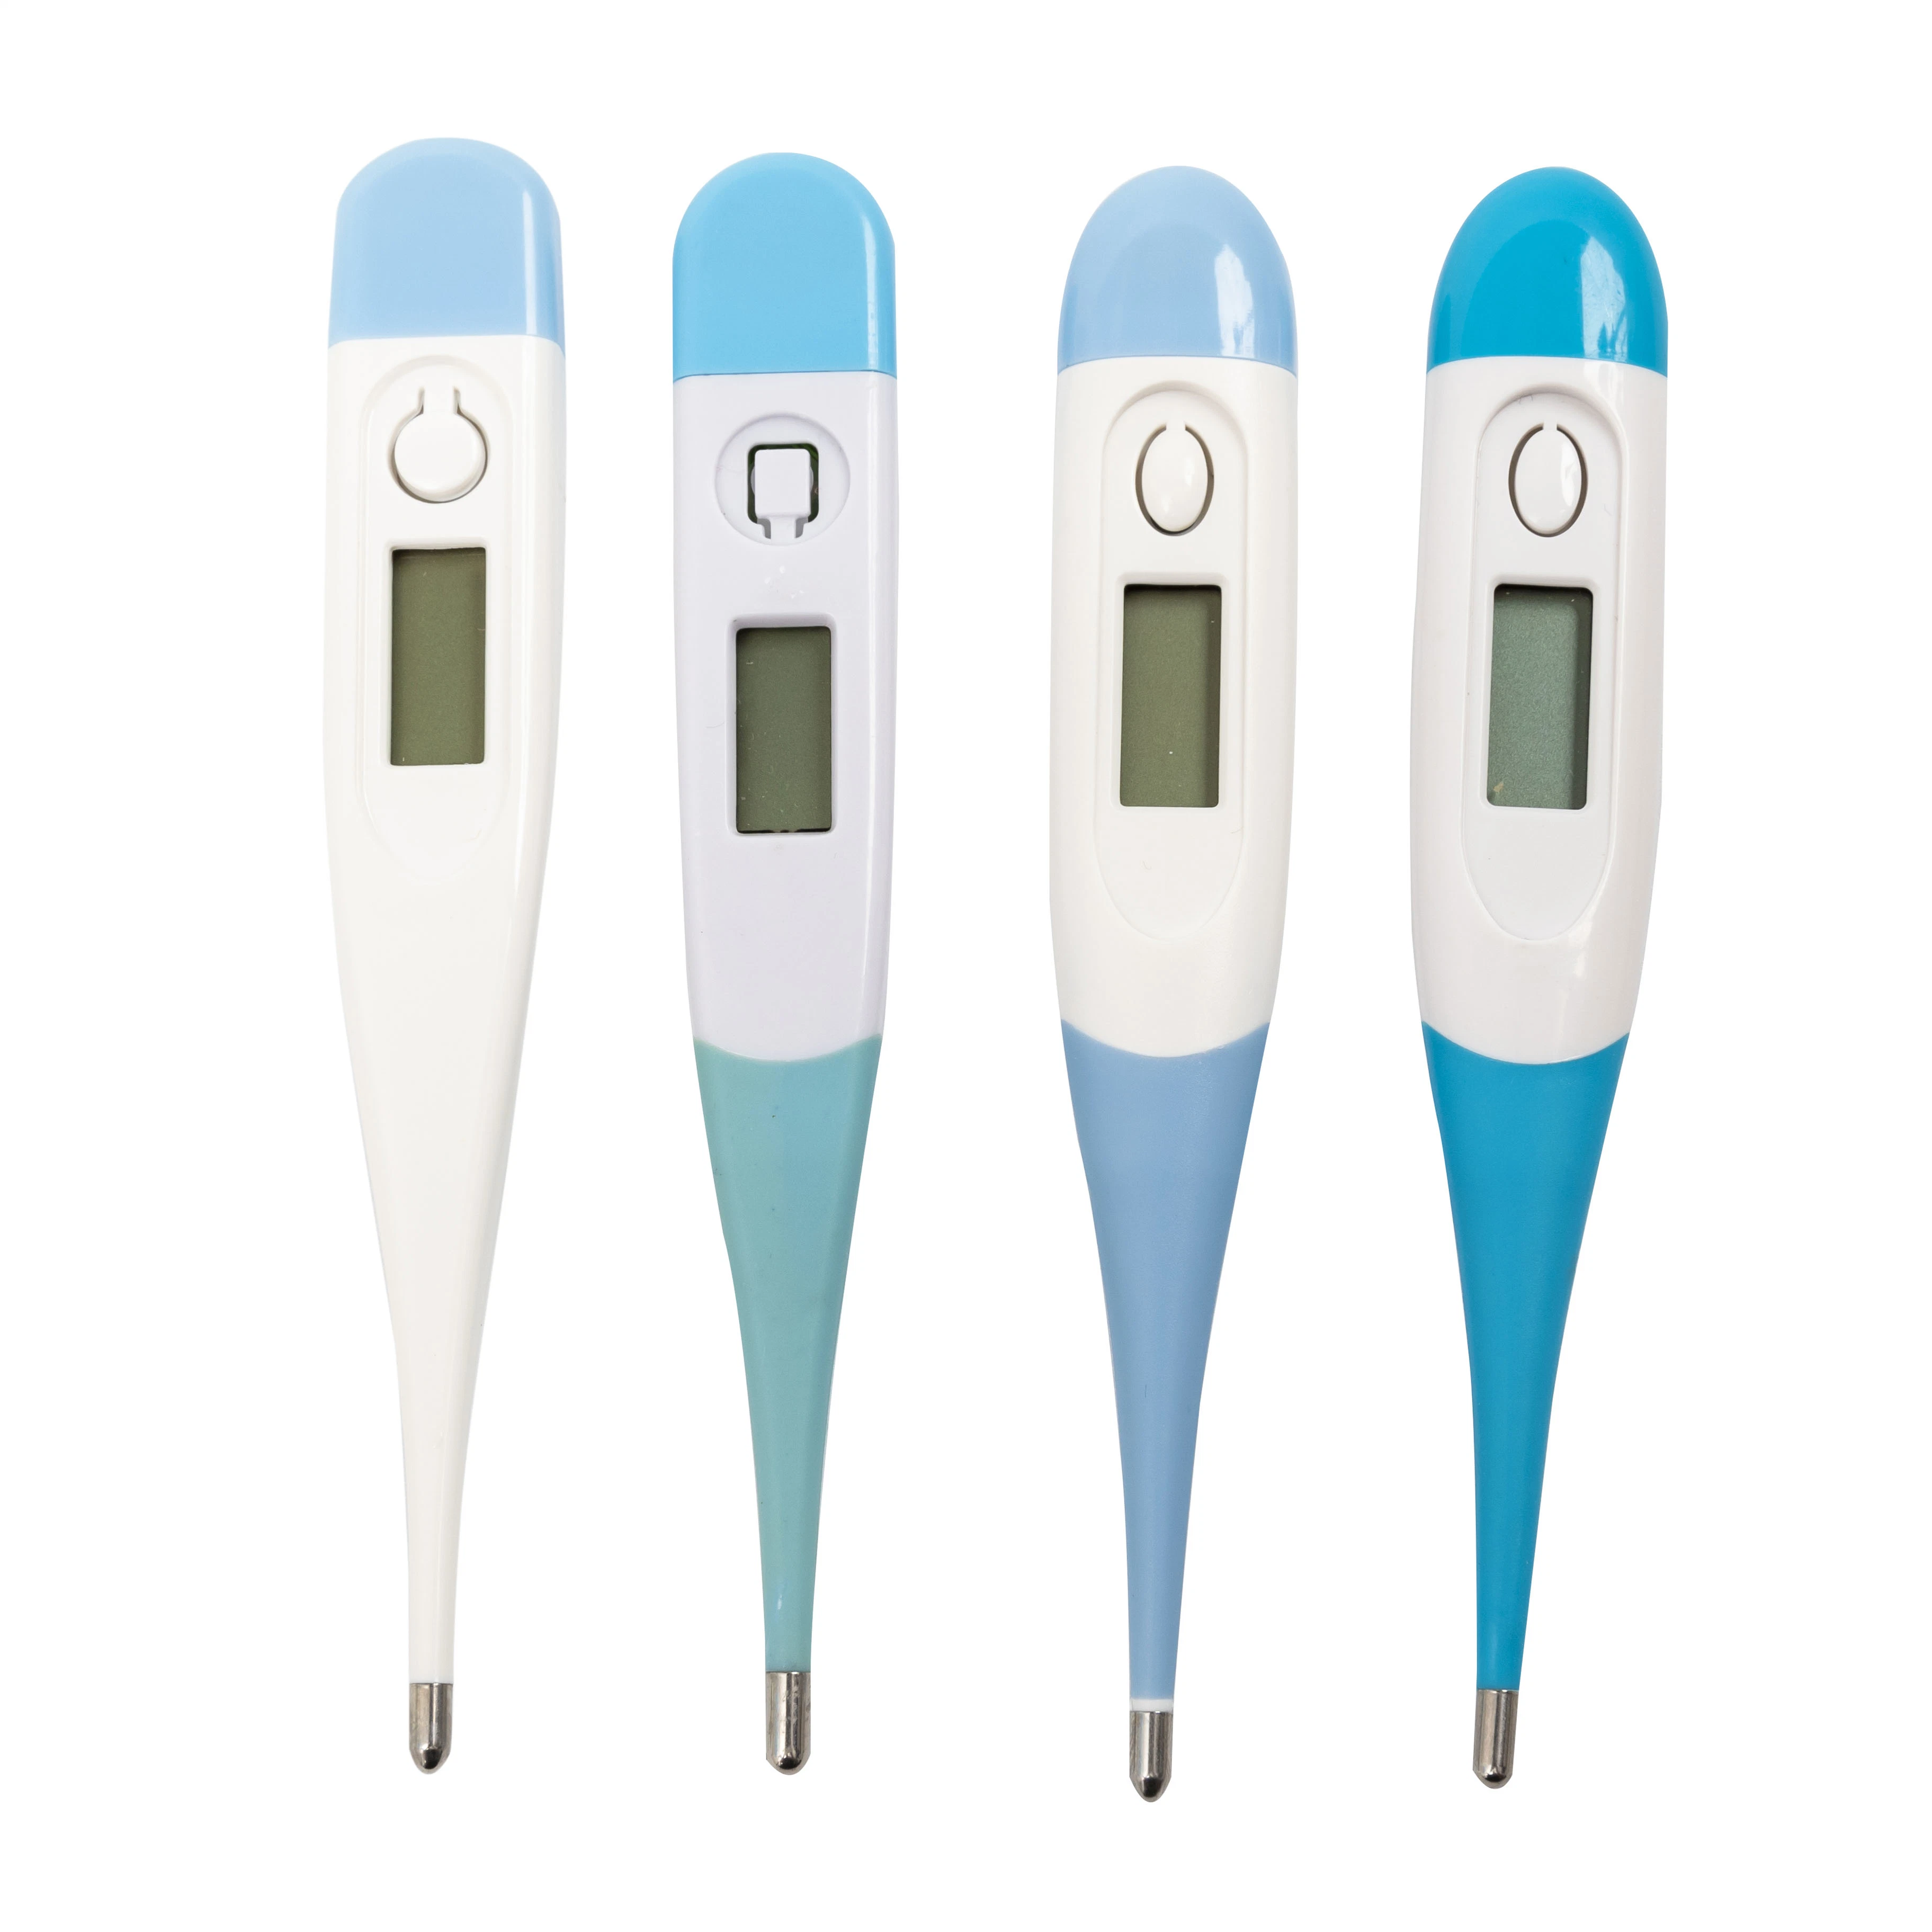 Adults Using Child Electronic Medical Digital Thermometer